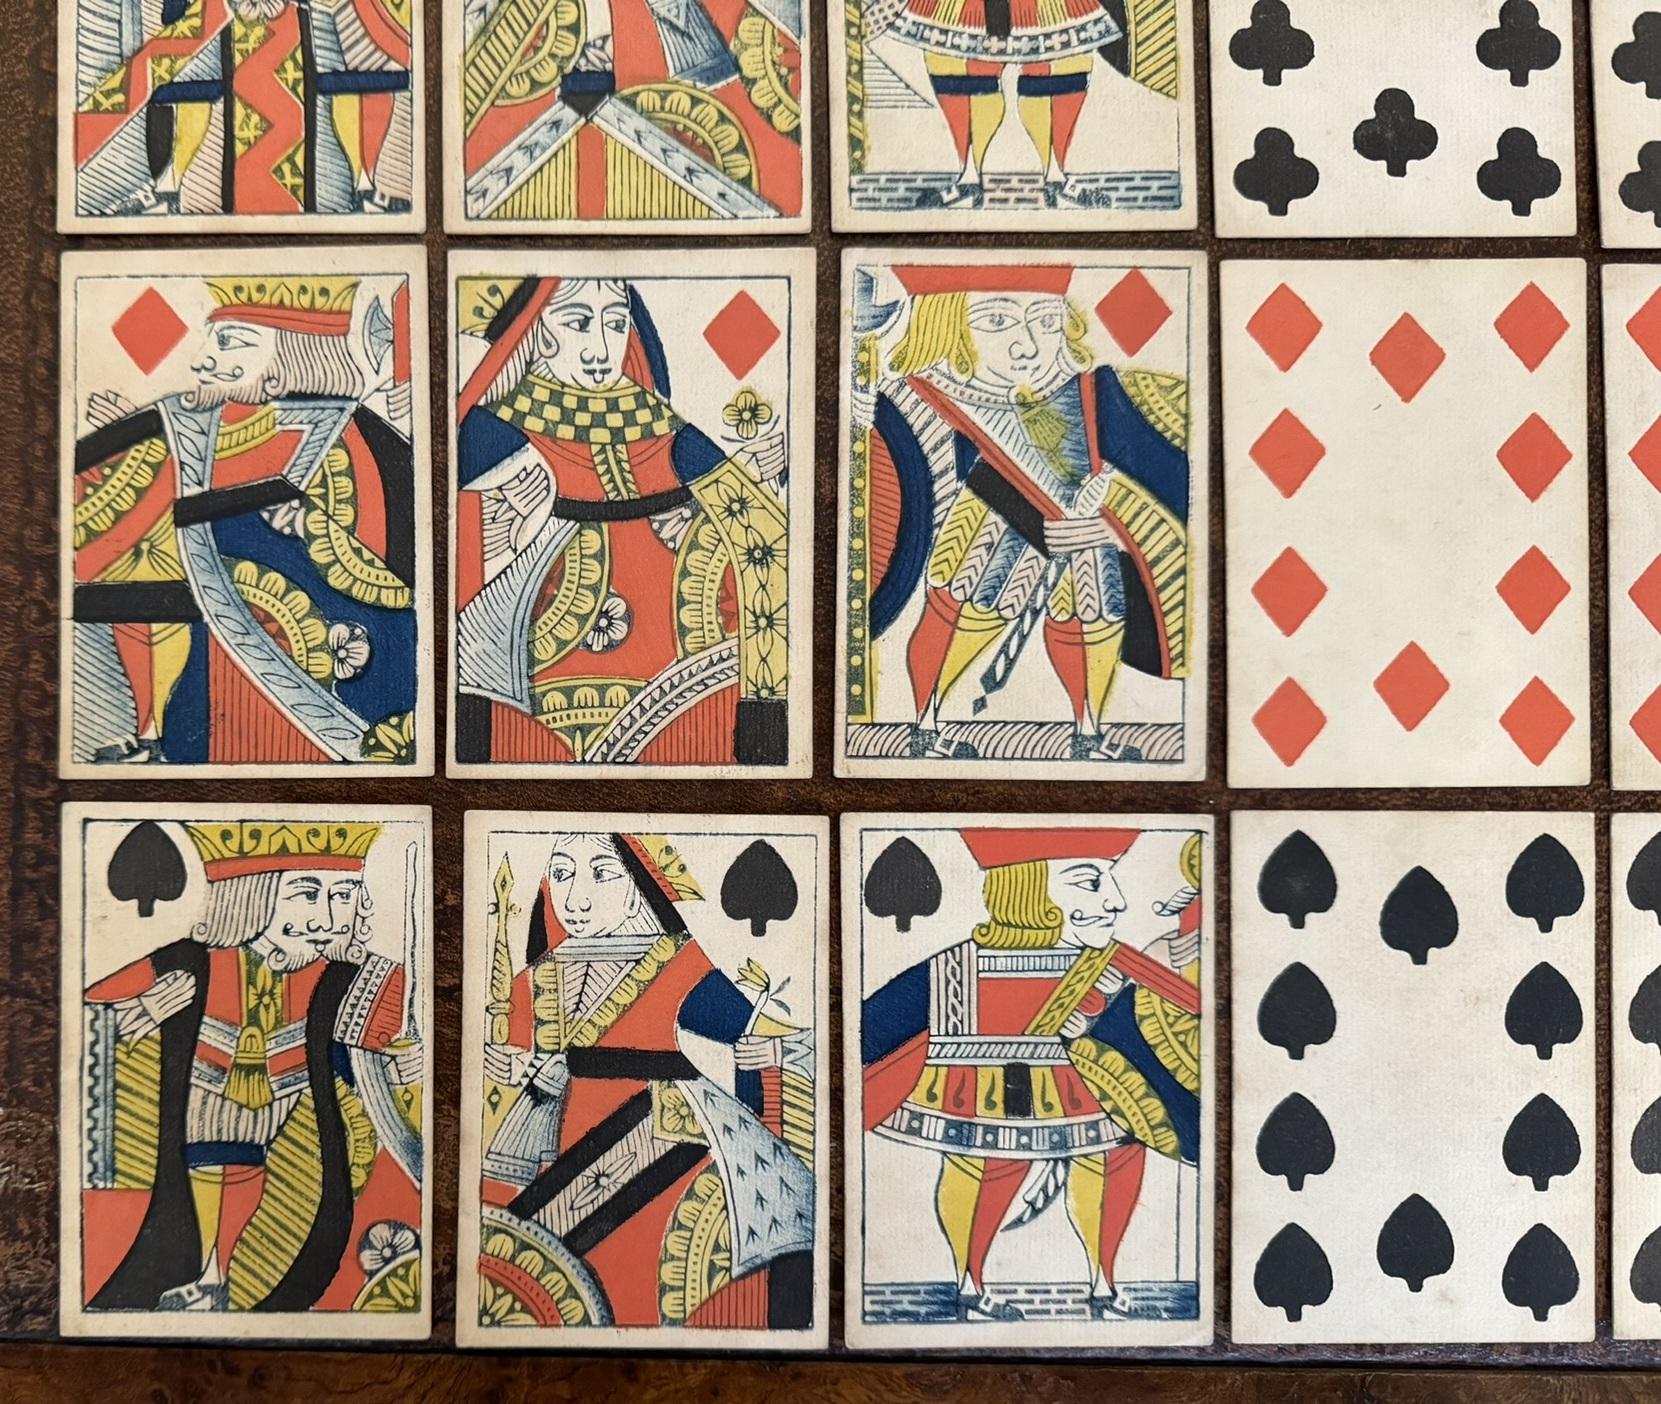 ANTIQUE 1830 THOMAS CRESWICK GEORGIAN PLAYiNG CARDS WITH FIZZLE ACE OF SPADES For Sale 8